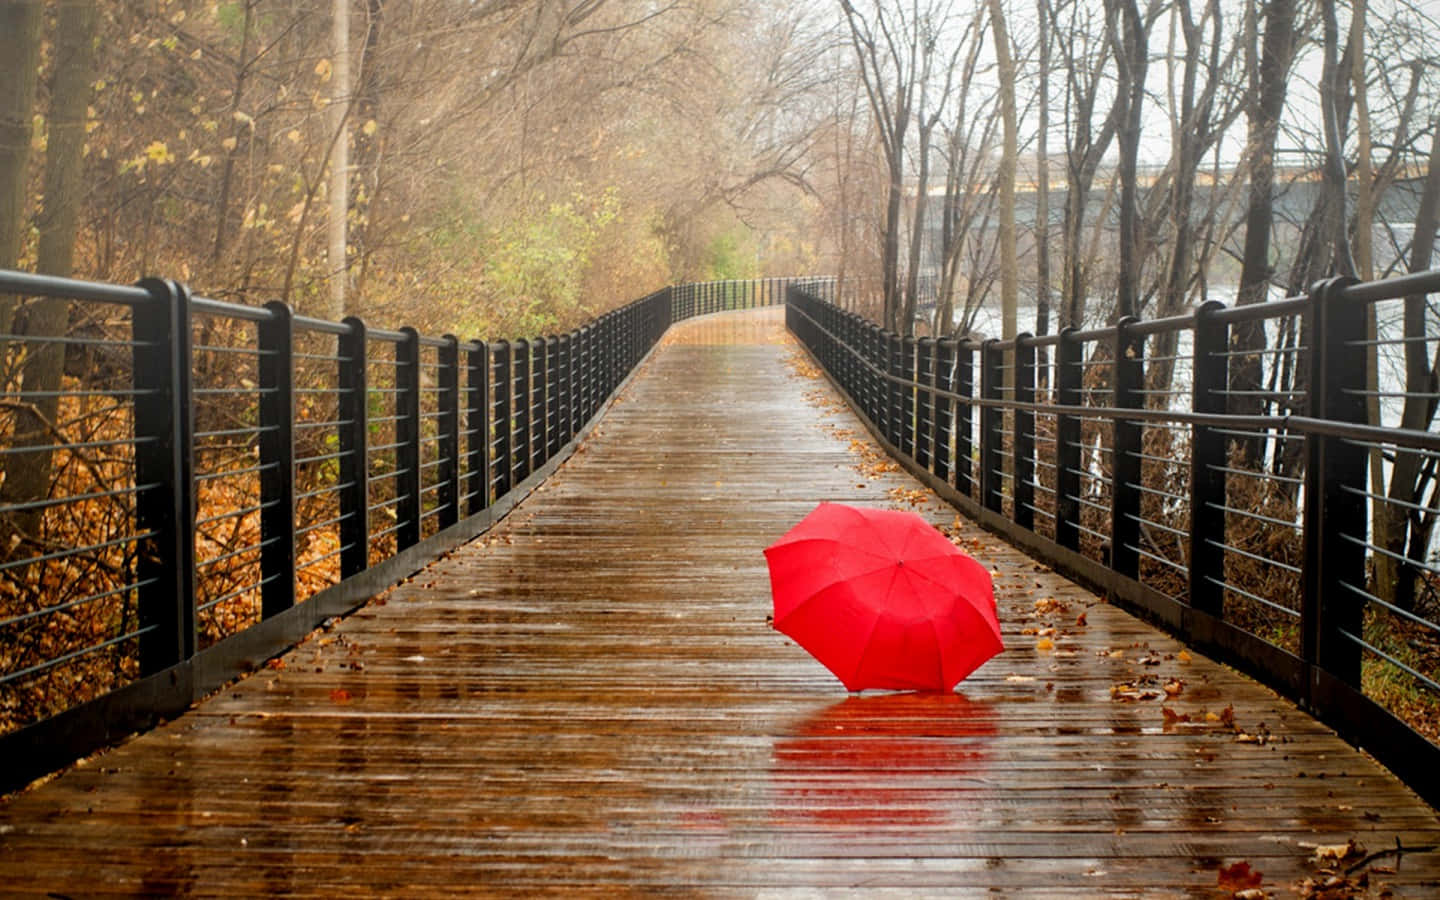 Red Umbrella On Wooden Path On A Rainy Day Picture